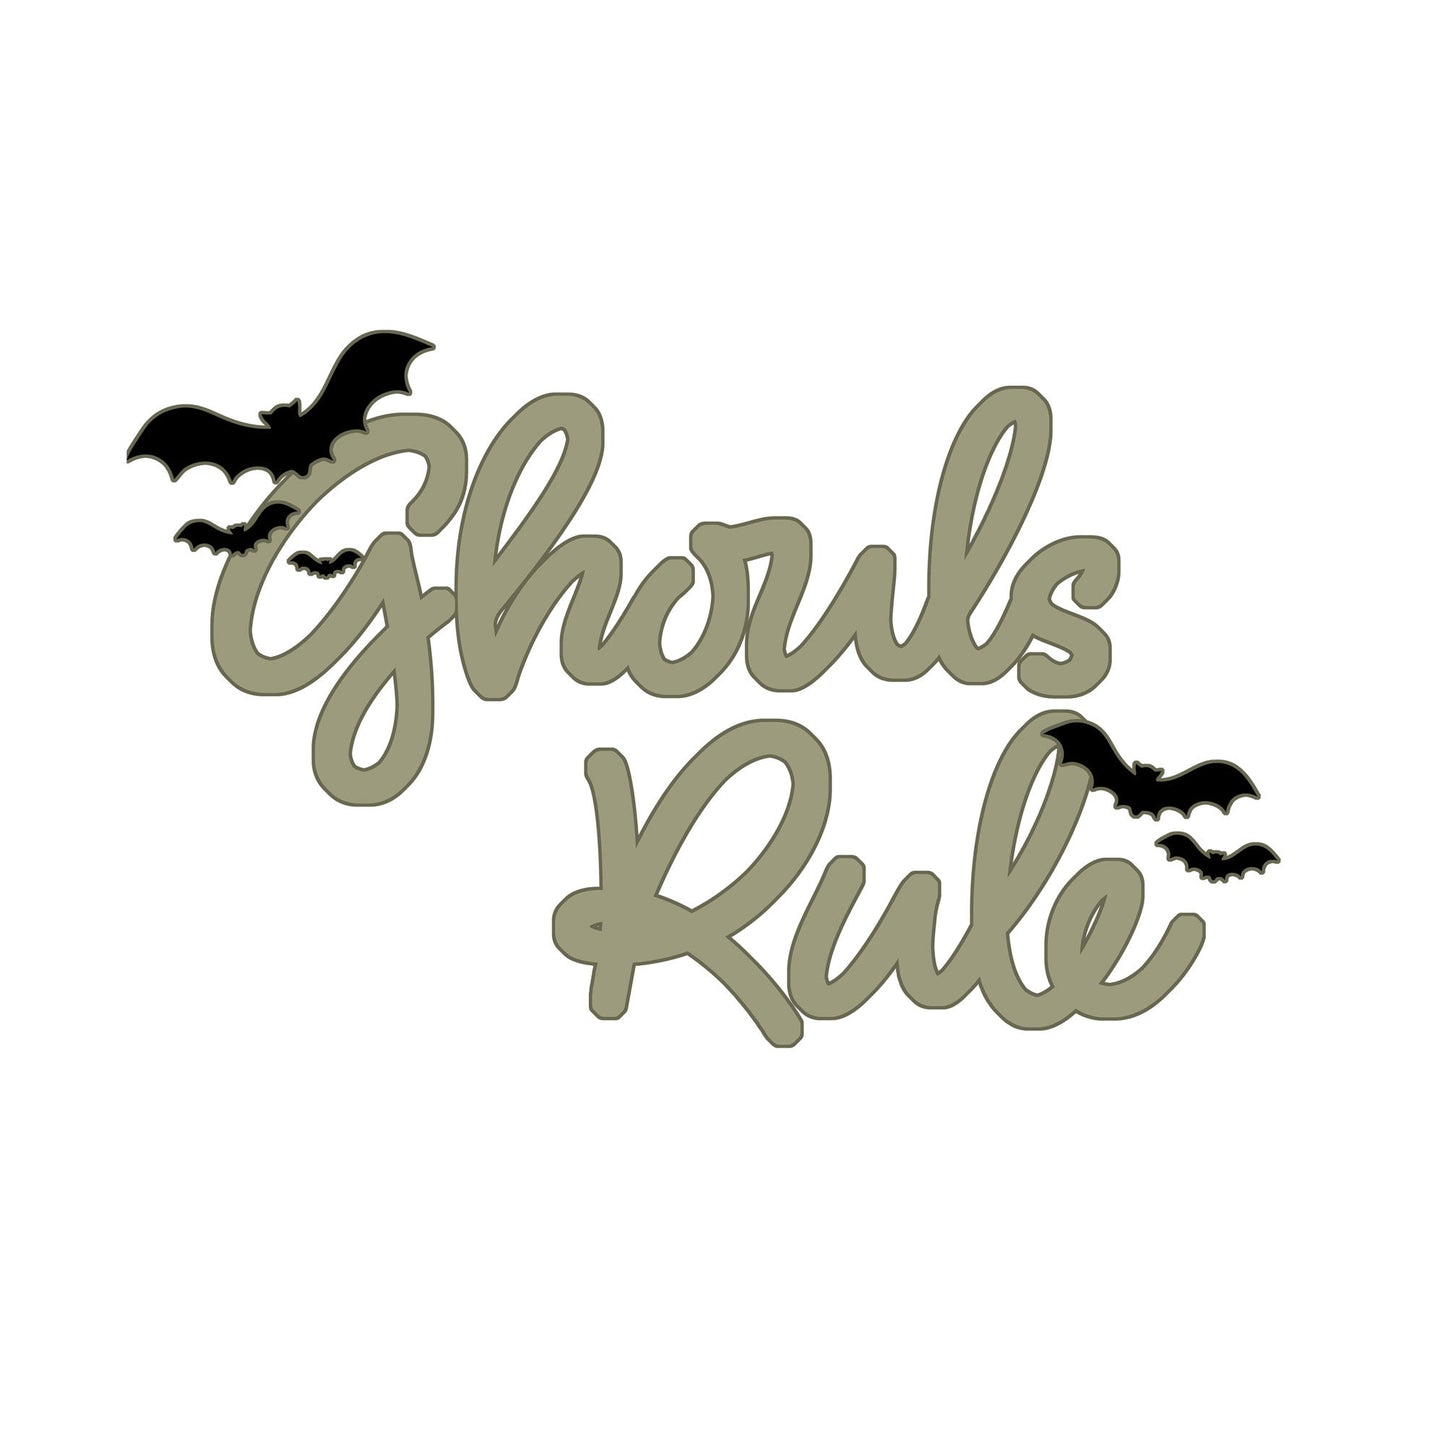 ghouls rule script design in a sage green with bnlack bats